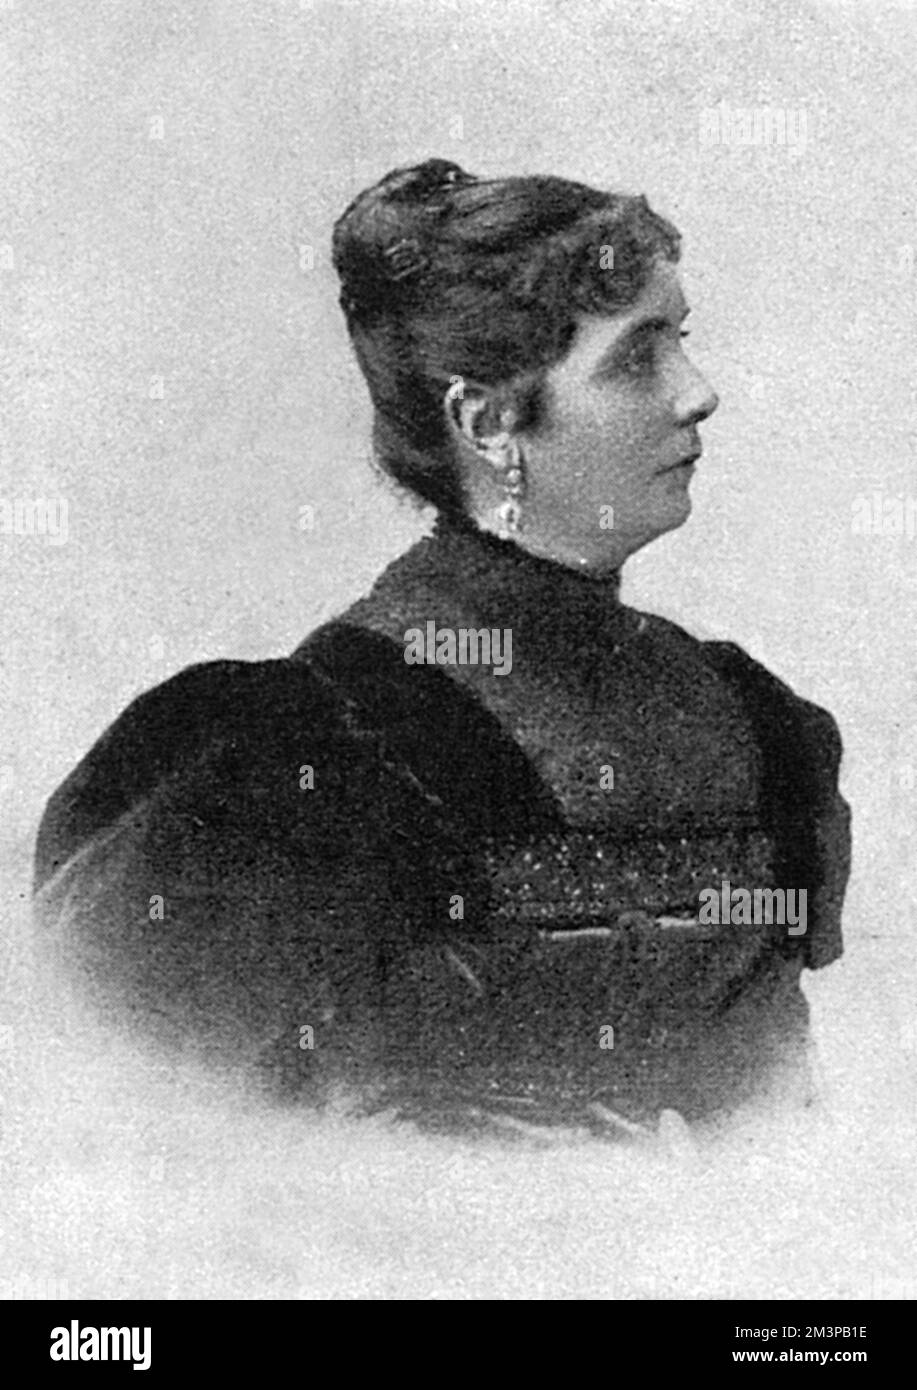 Madame de Kallay (Vilma Bethlen), the wife of Beni Kallay, Austro-Hungarian administrator of the Condominium of Bosnia and Herzegovina until his death in 1903. Madame de Kallay was said to possess much grace and charm.     Date: 1895 Stock Photo